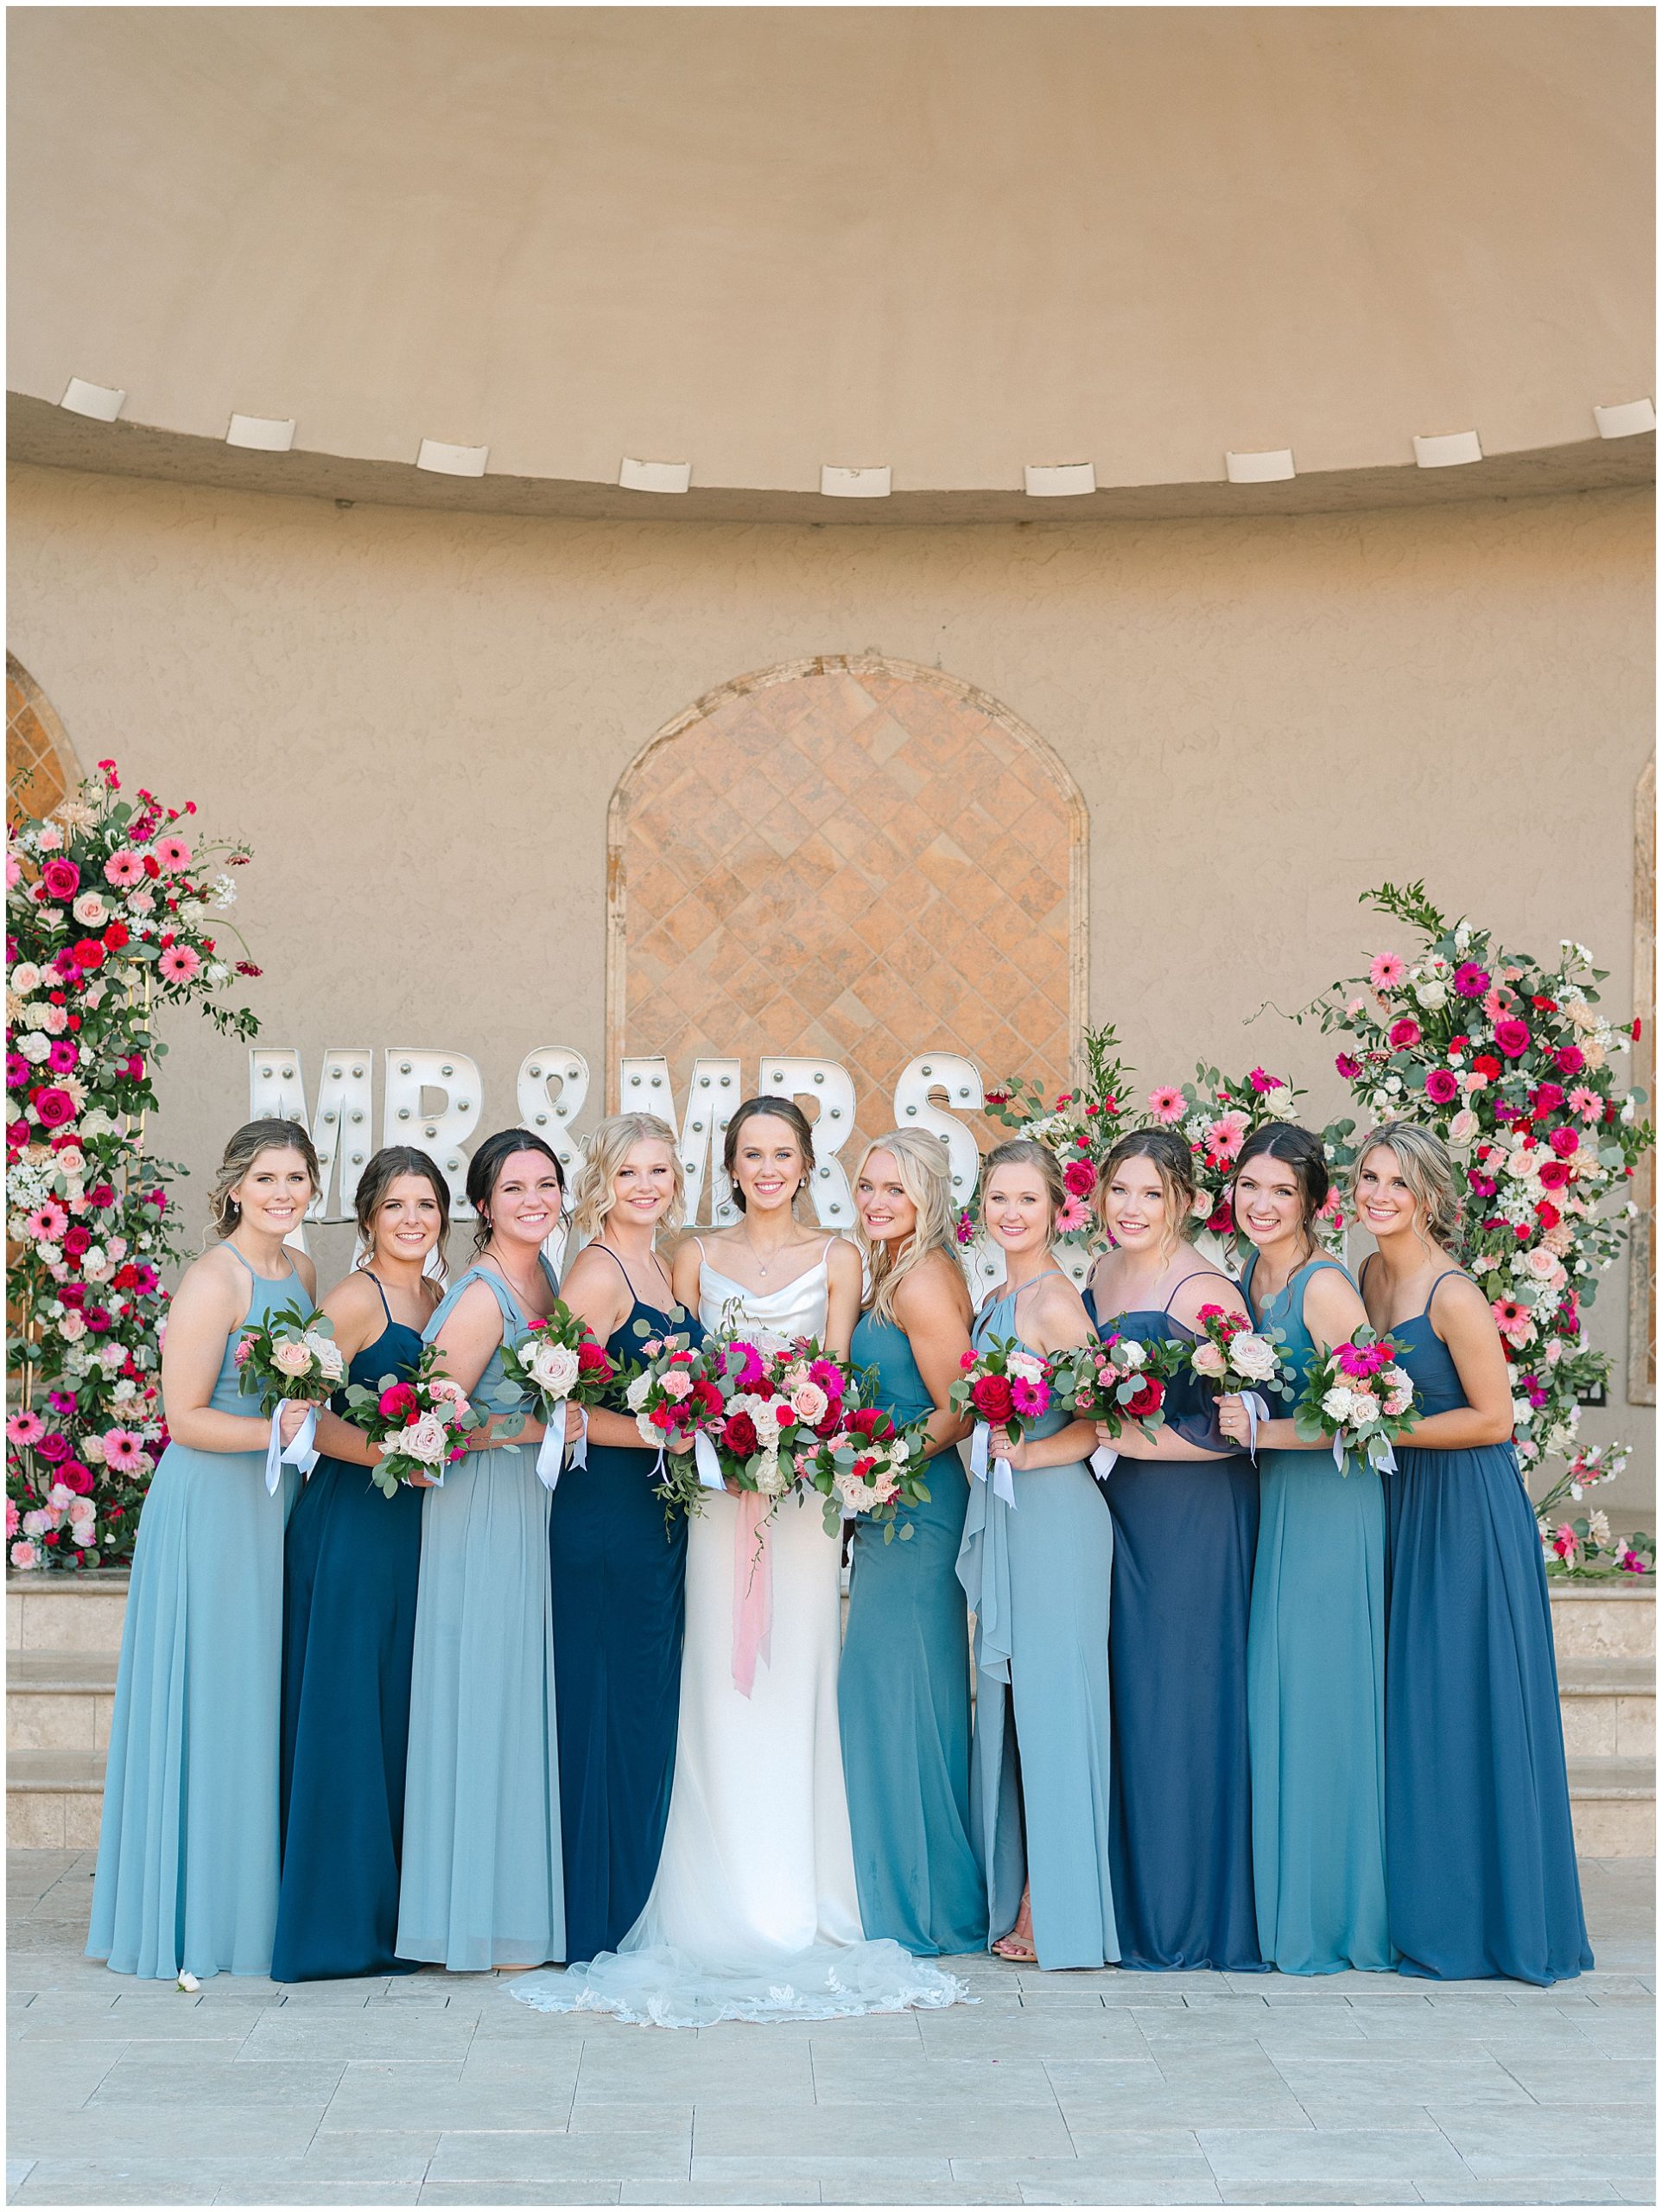 Bride and Bridesmaids in Shades of Blue sleek gowns.